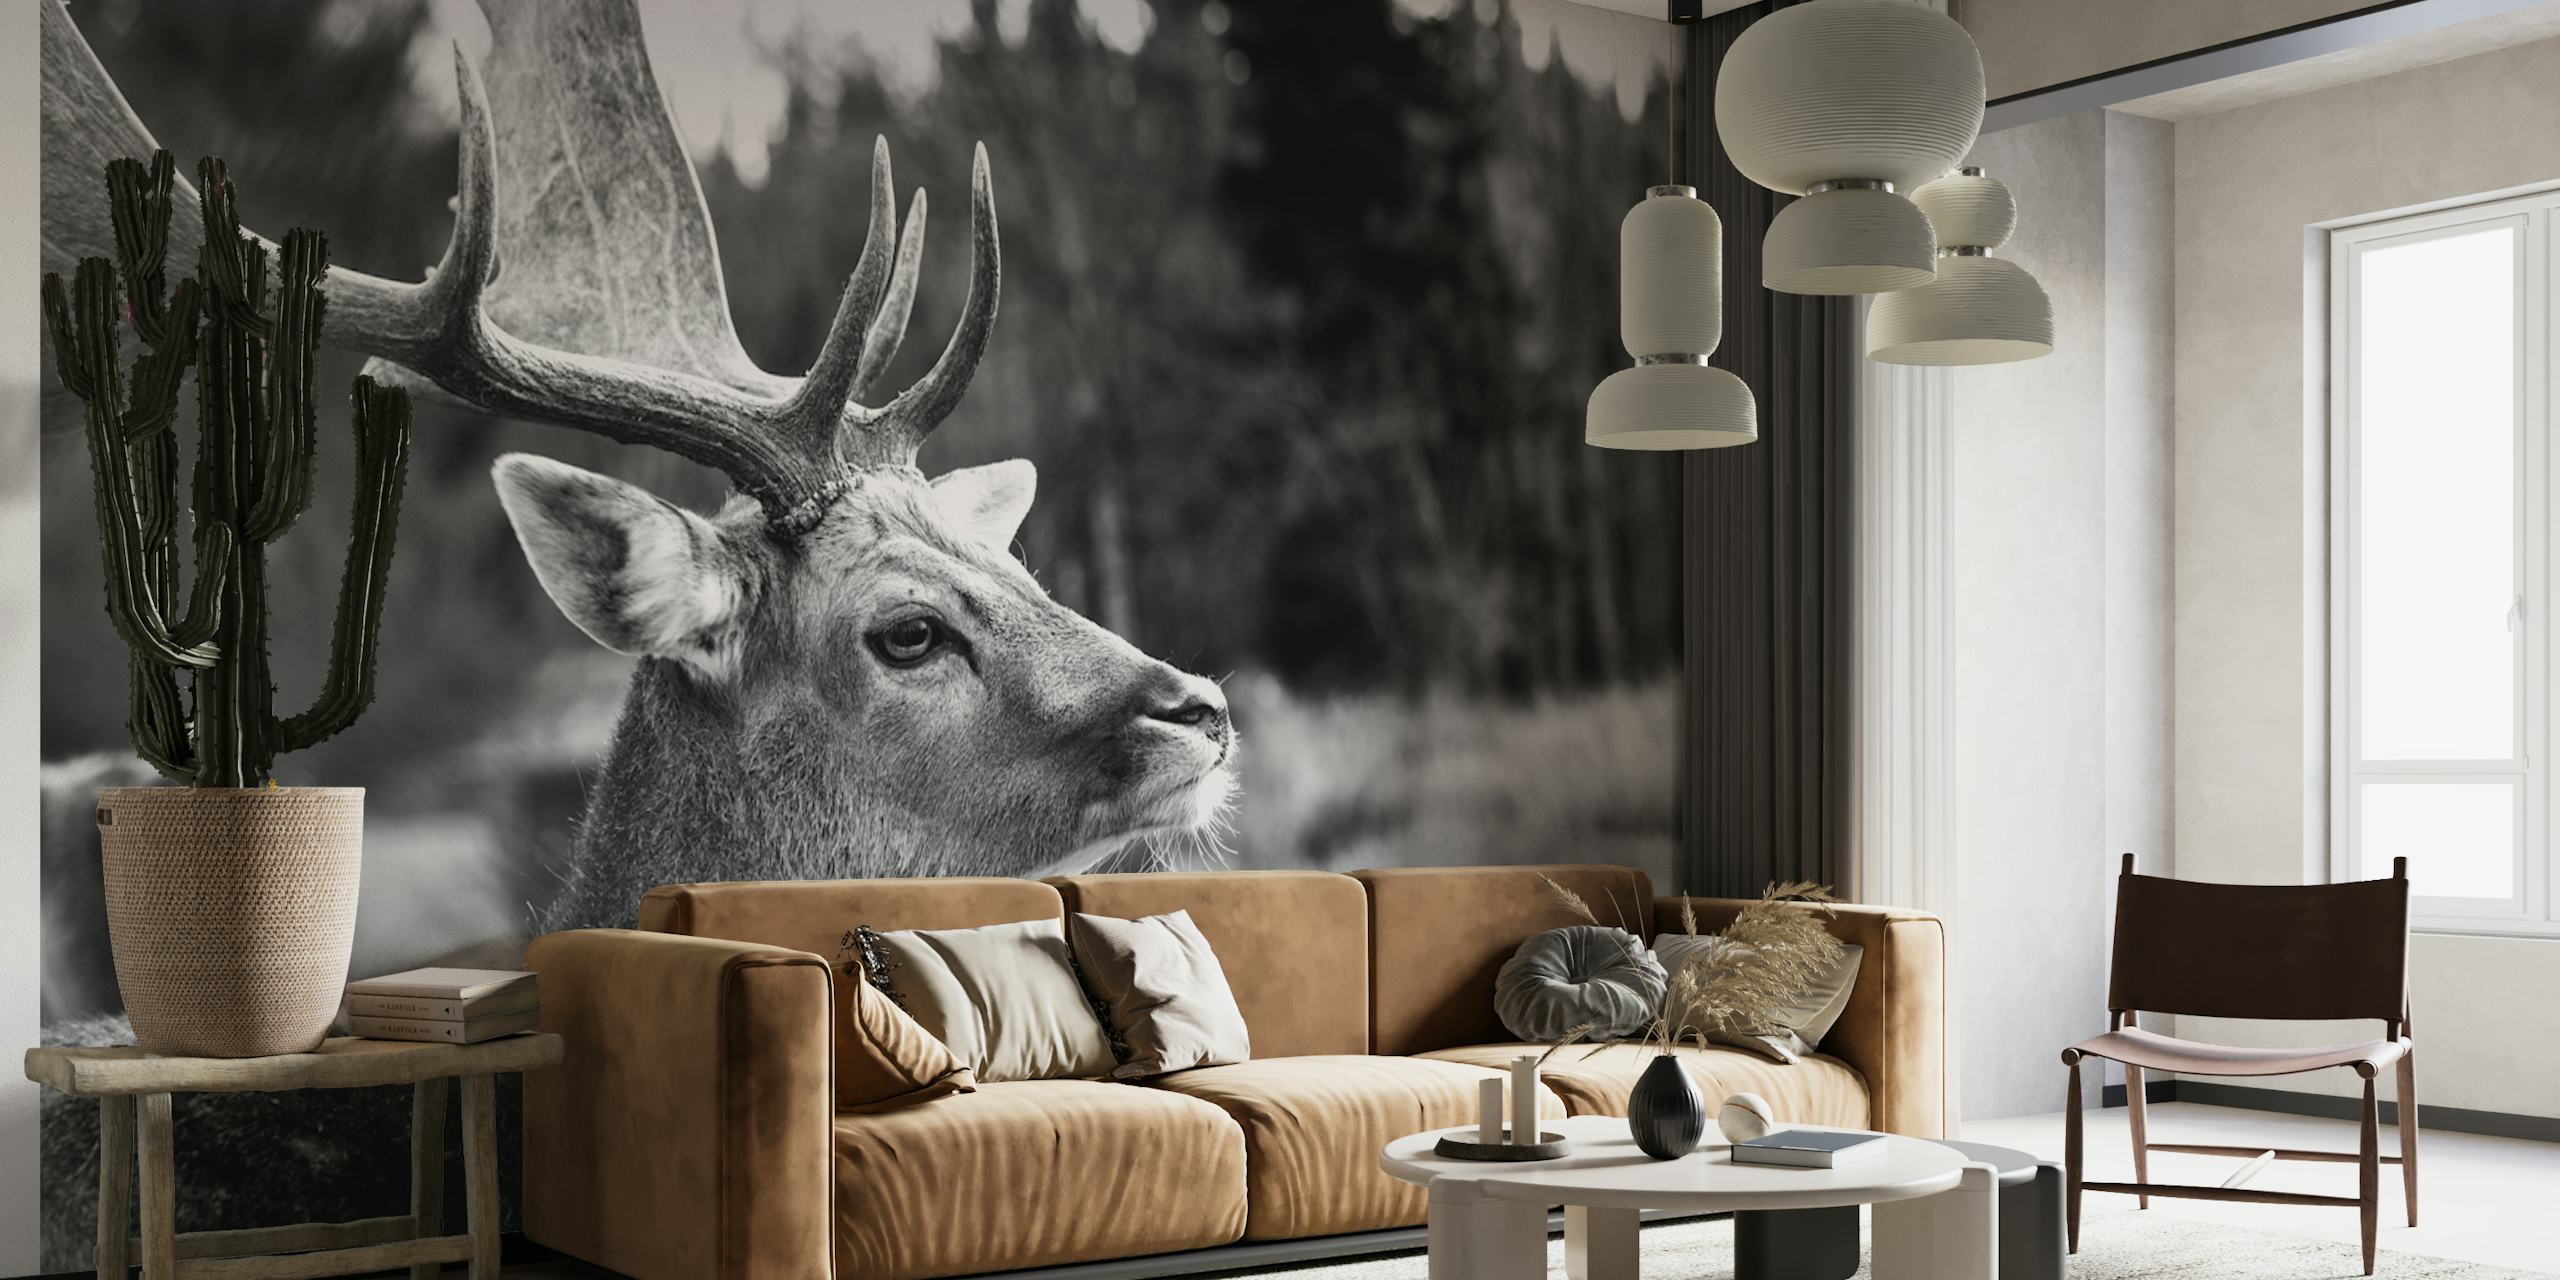 Monochrome wall mural depicting a stag in a mountain forest